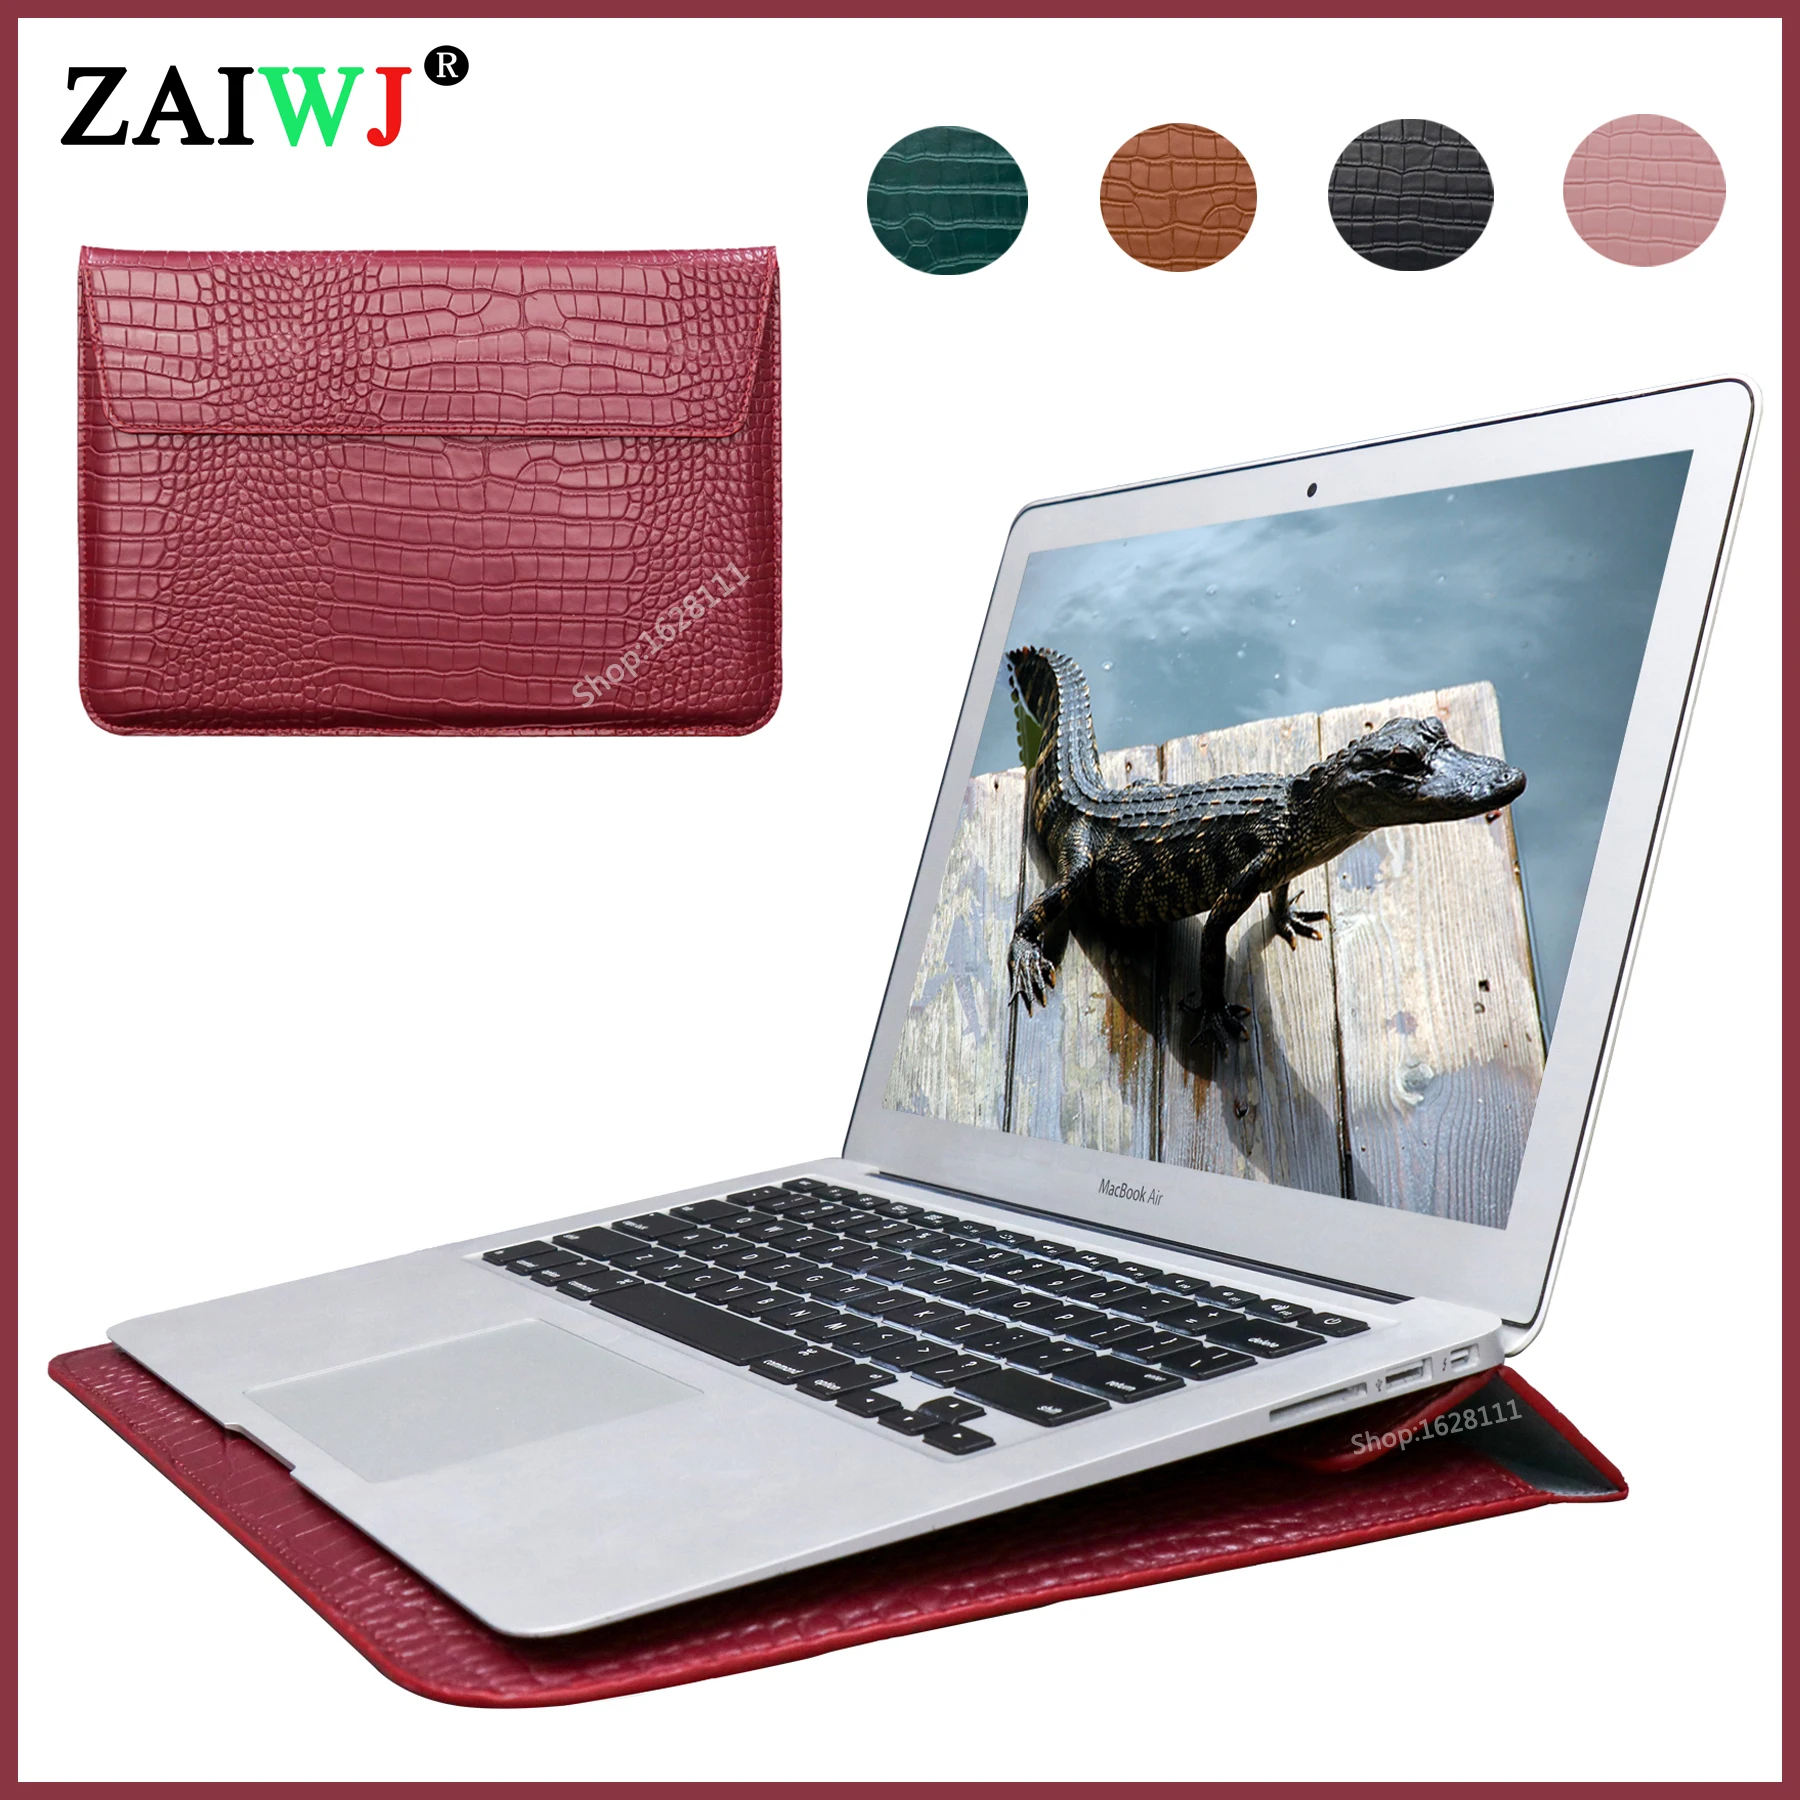 

Laptop Sleeve bag For Macbook Air Pro Retina 13.3 11 12 13 15 15.4 16 Inch Touch ID 2020 M1 Chip A2337 A2179 A2338 notebook case